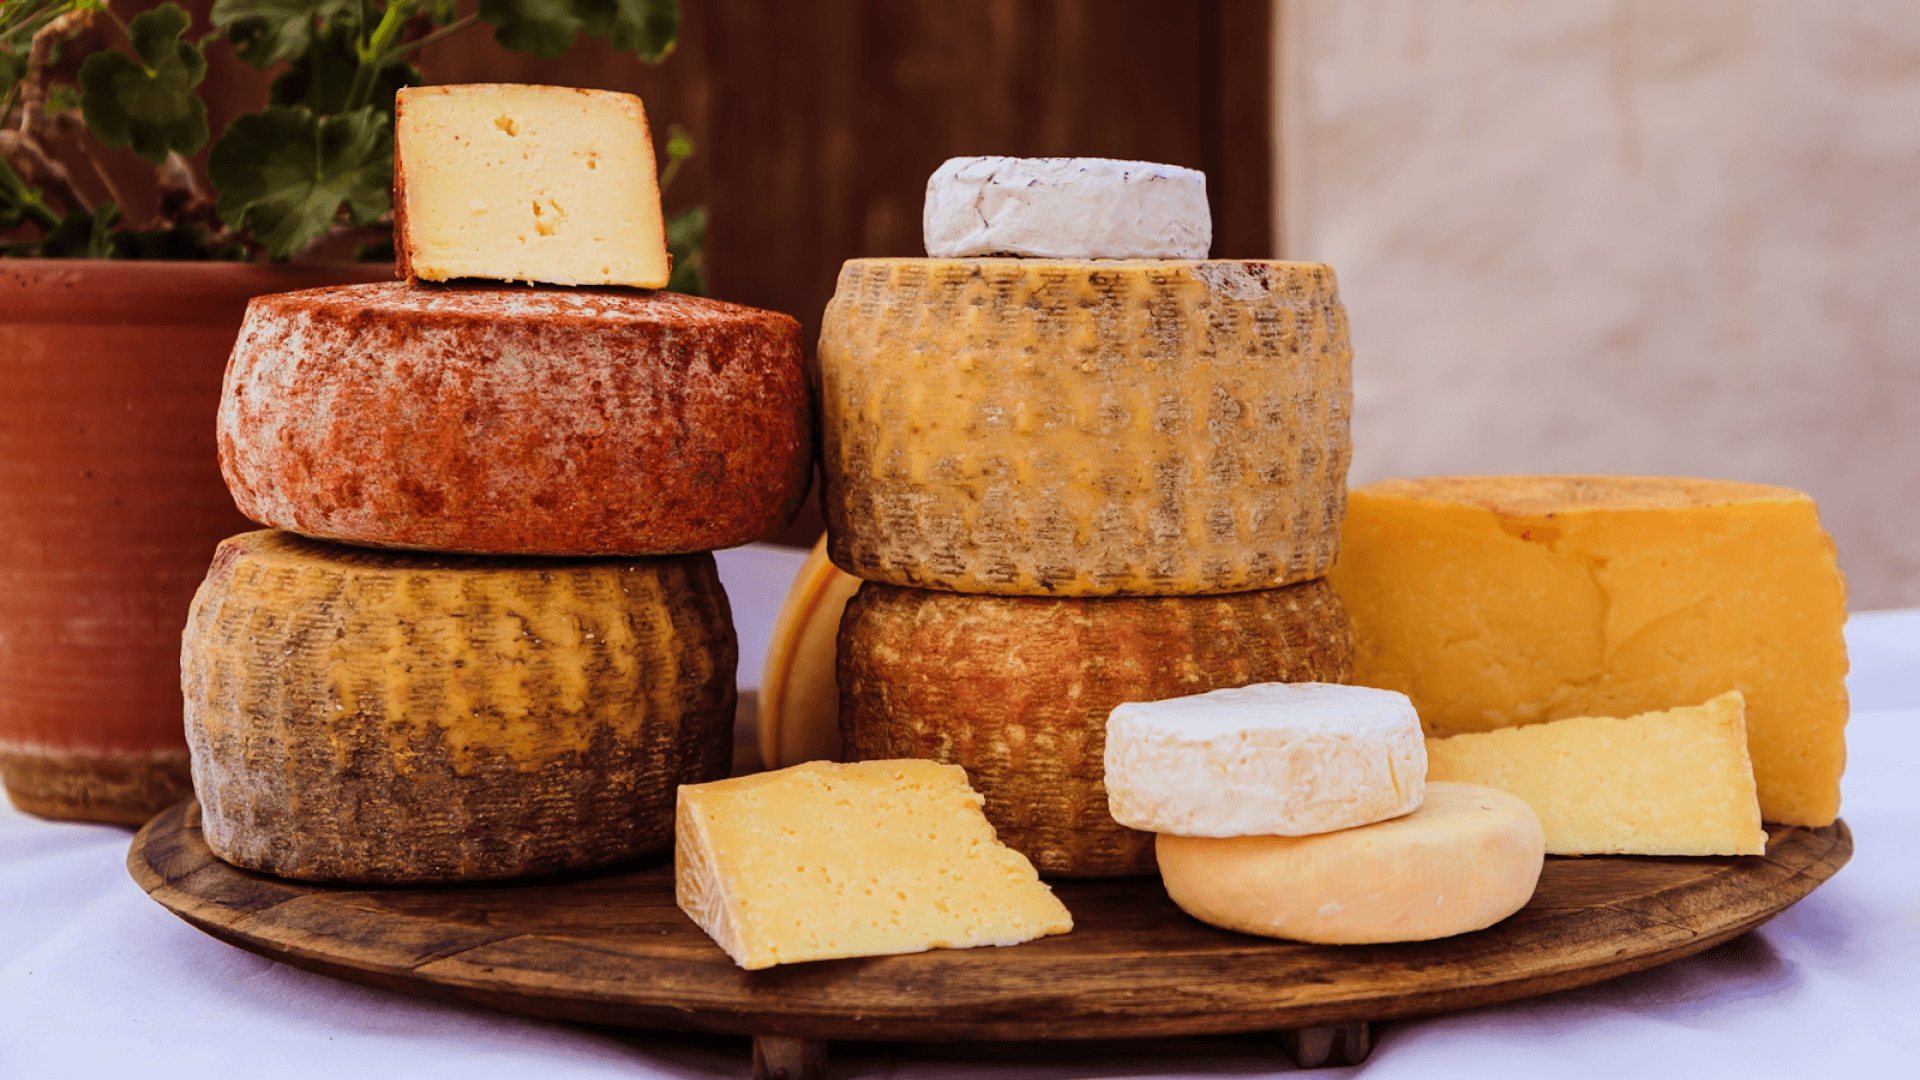 South Africa’s thriving cheese industry